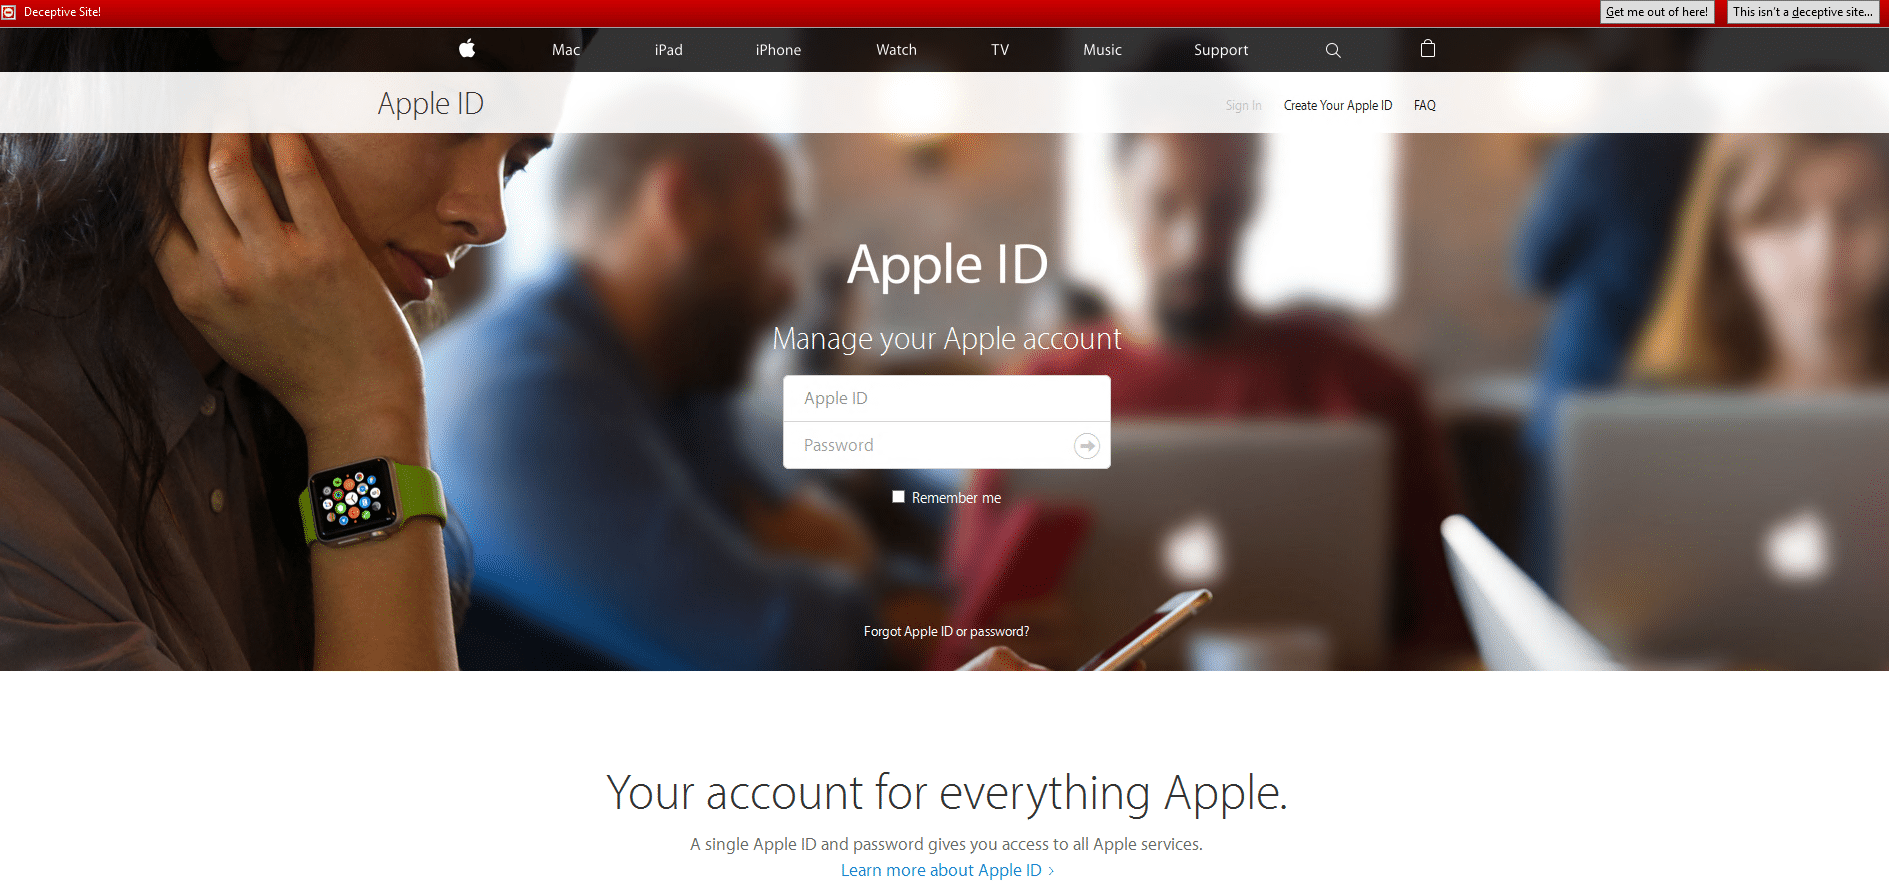 Fake Apple ID log in page linked to SMS scam